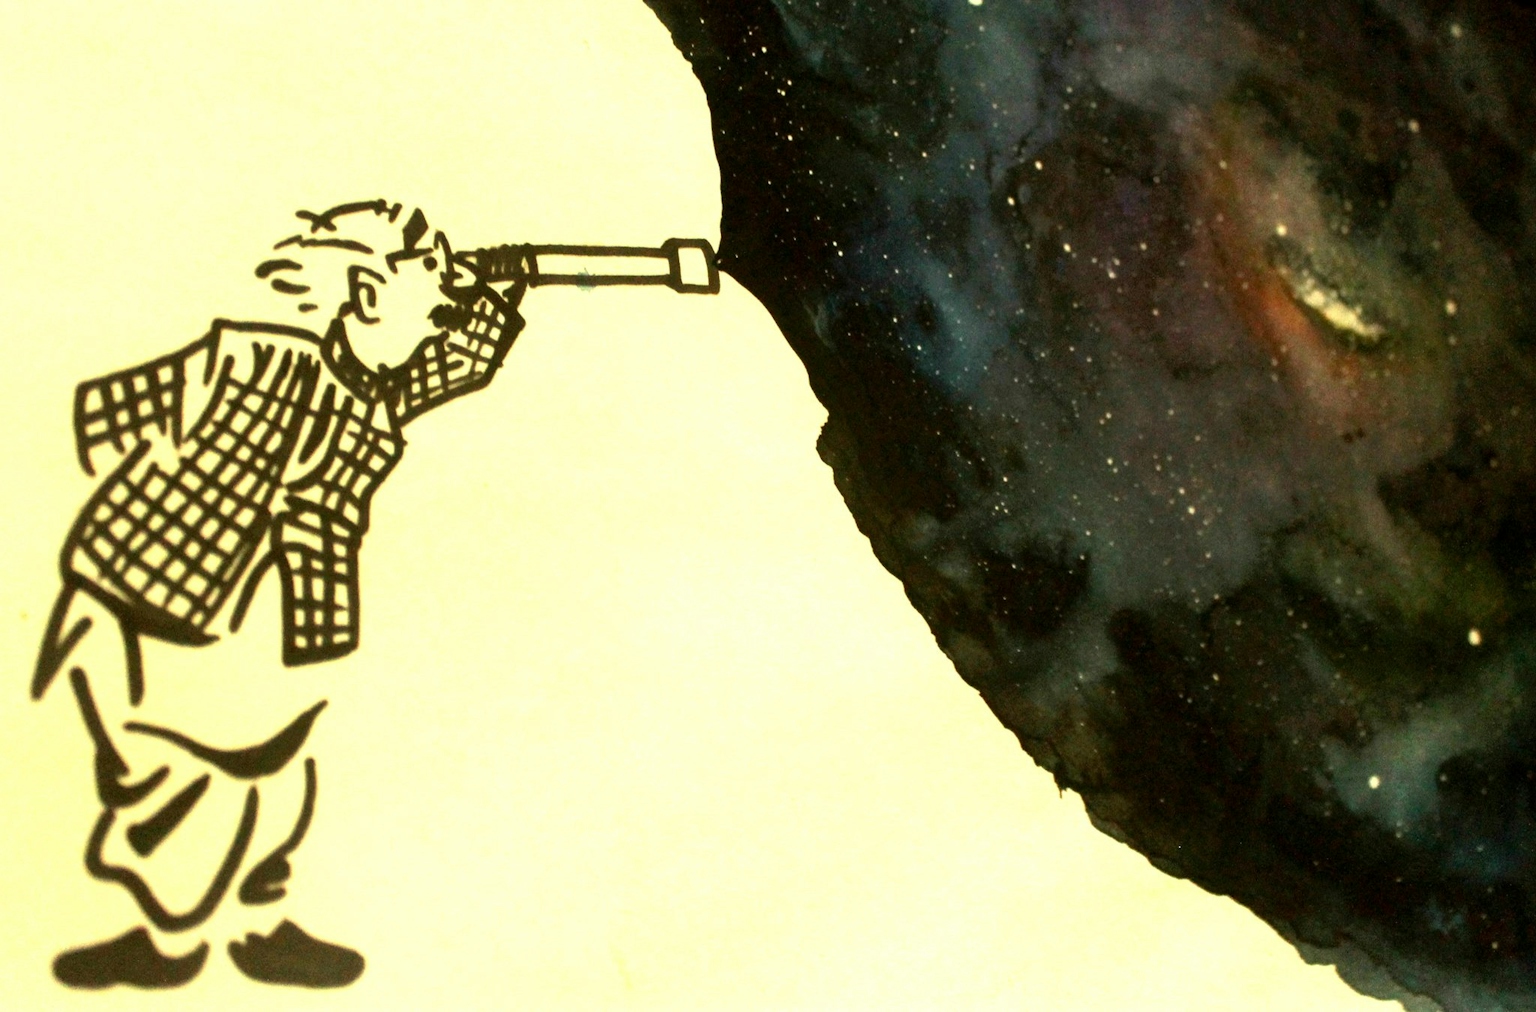 Painting by Shweta Kulkarni, CEO of AstronEra, of common man looking at the universe